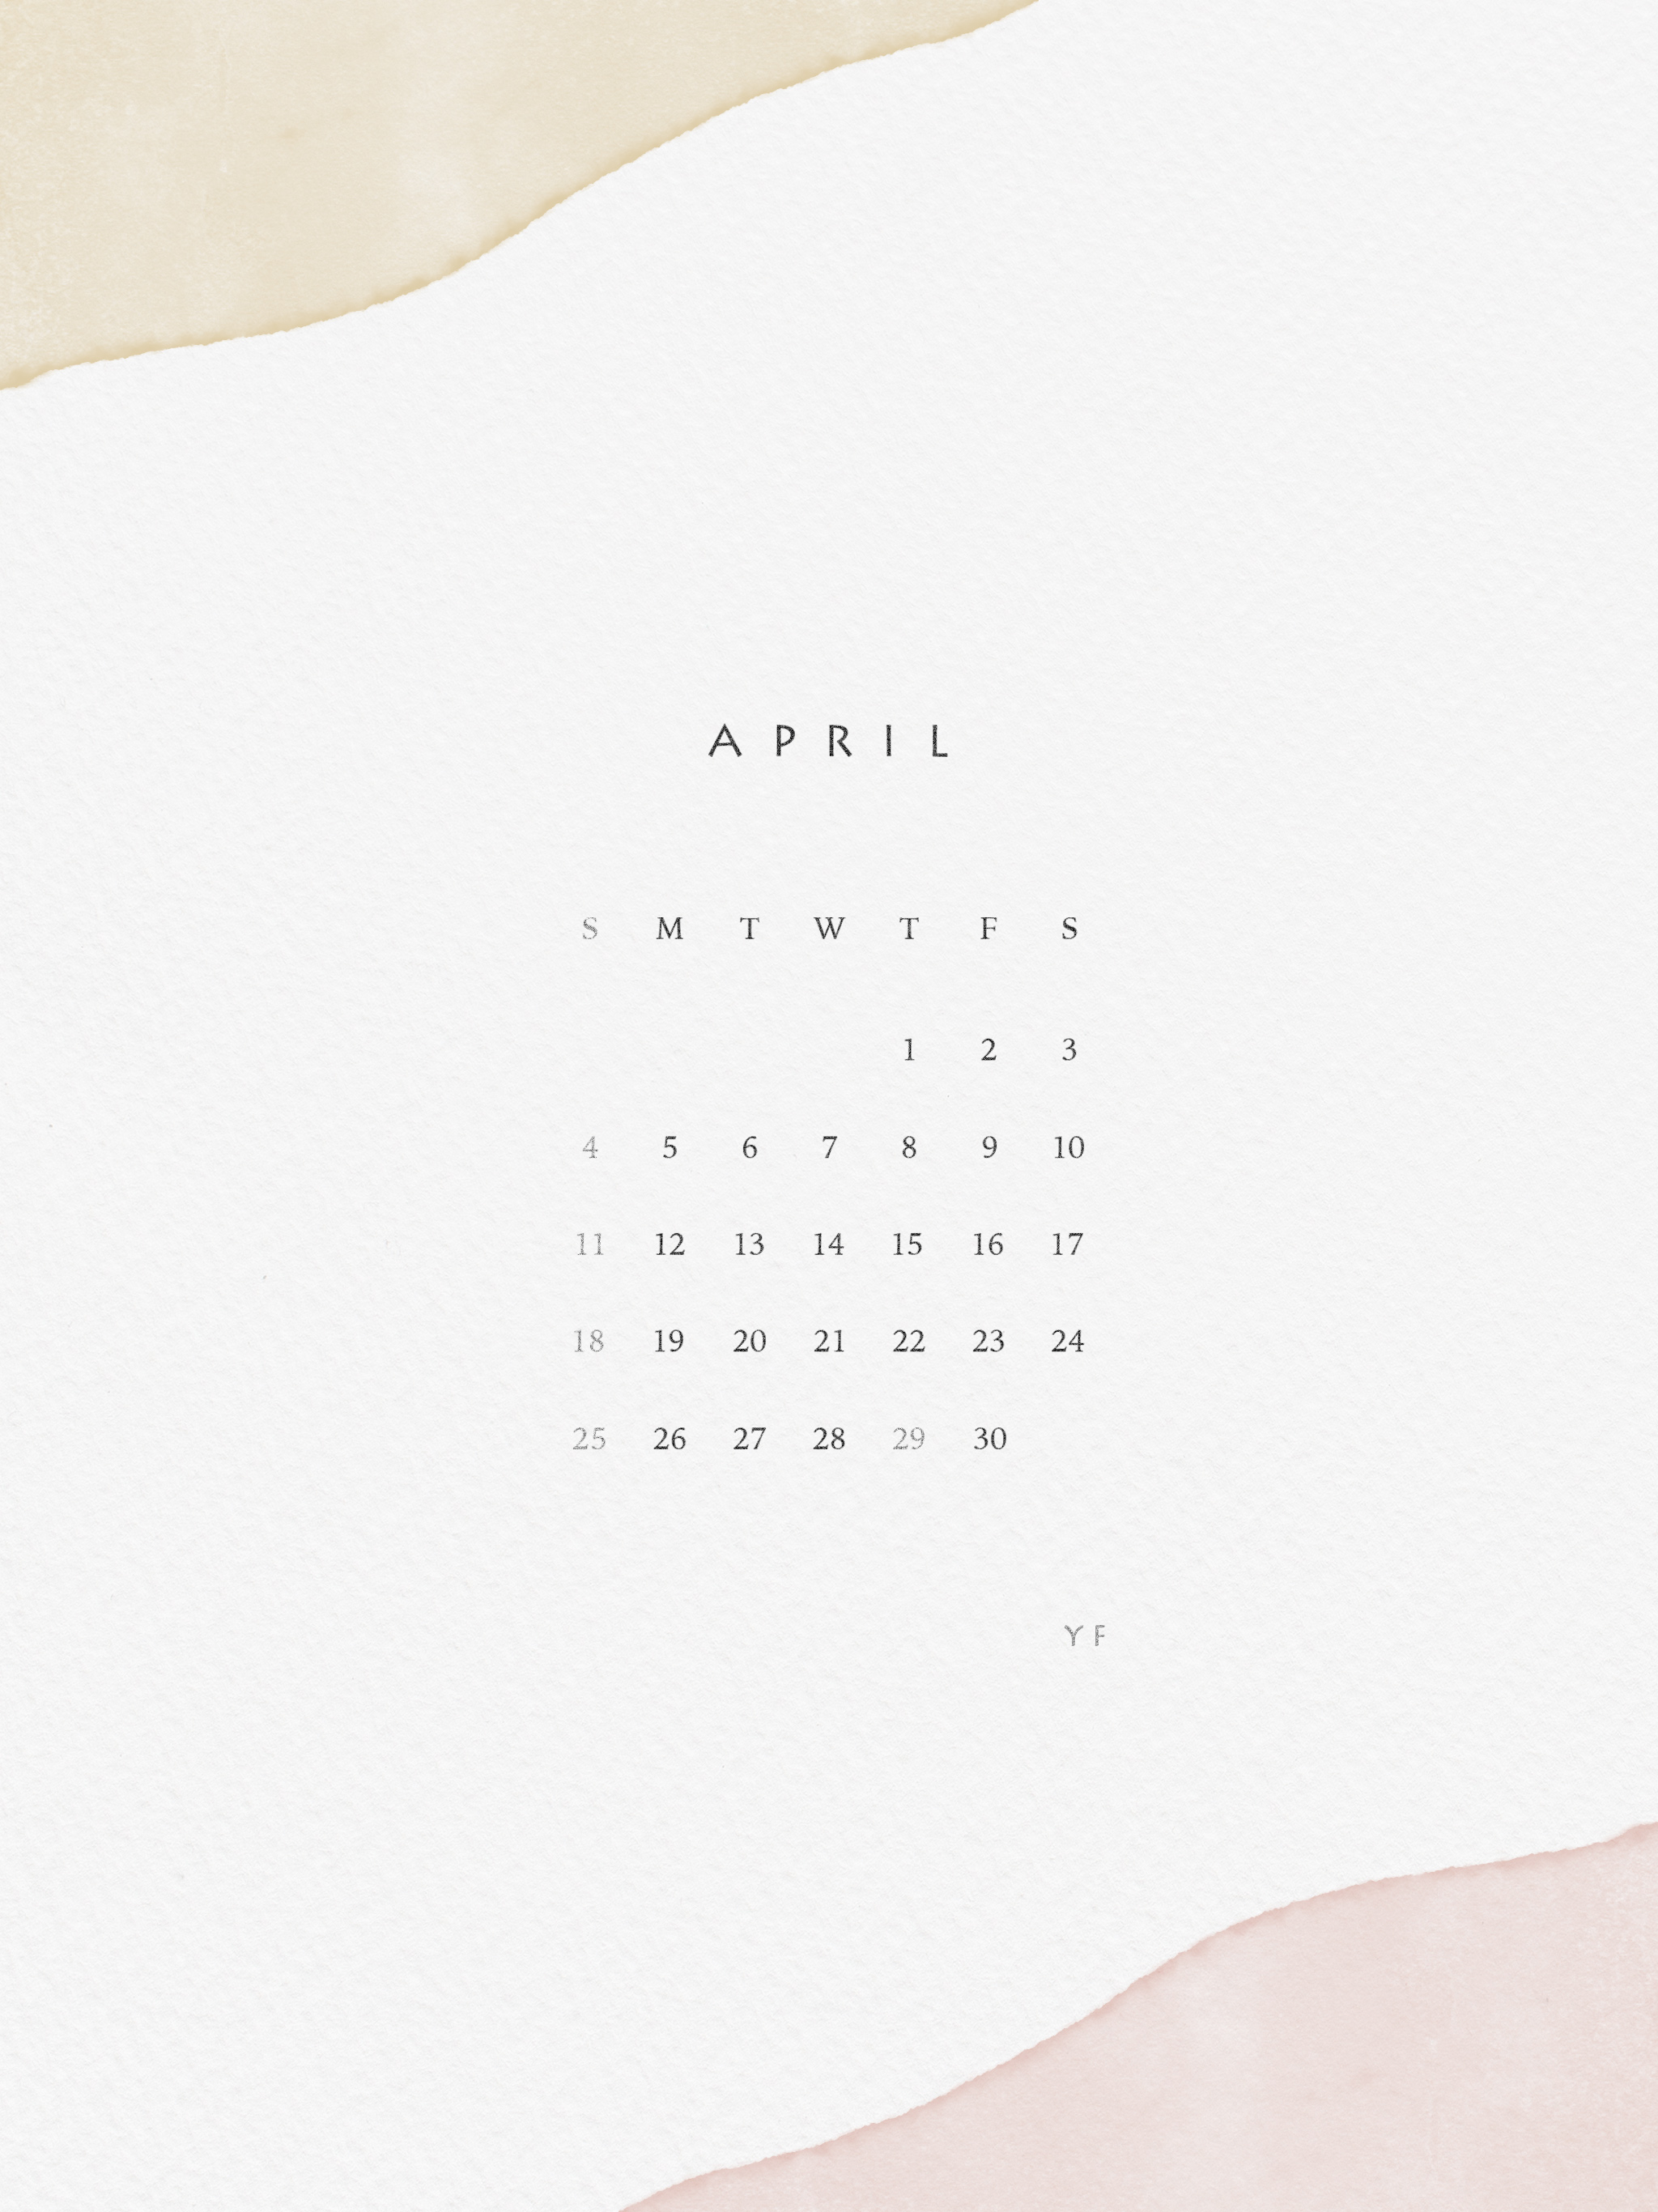 April 21 Calendar Wallpaper For The Ipad Designed By Yf